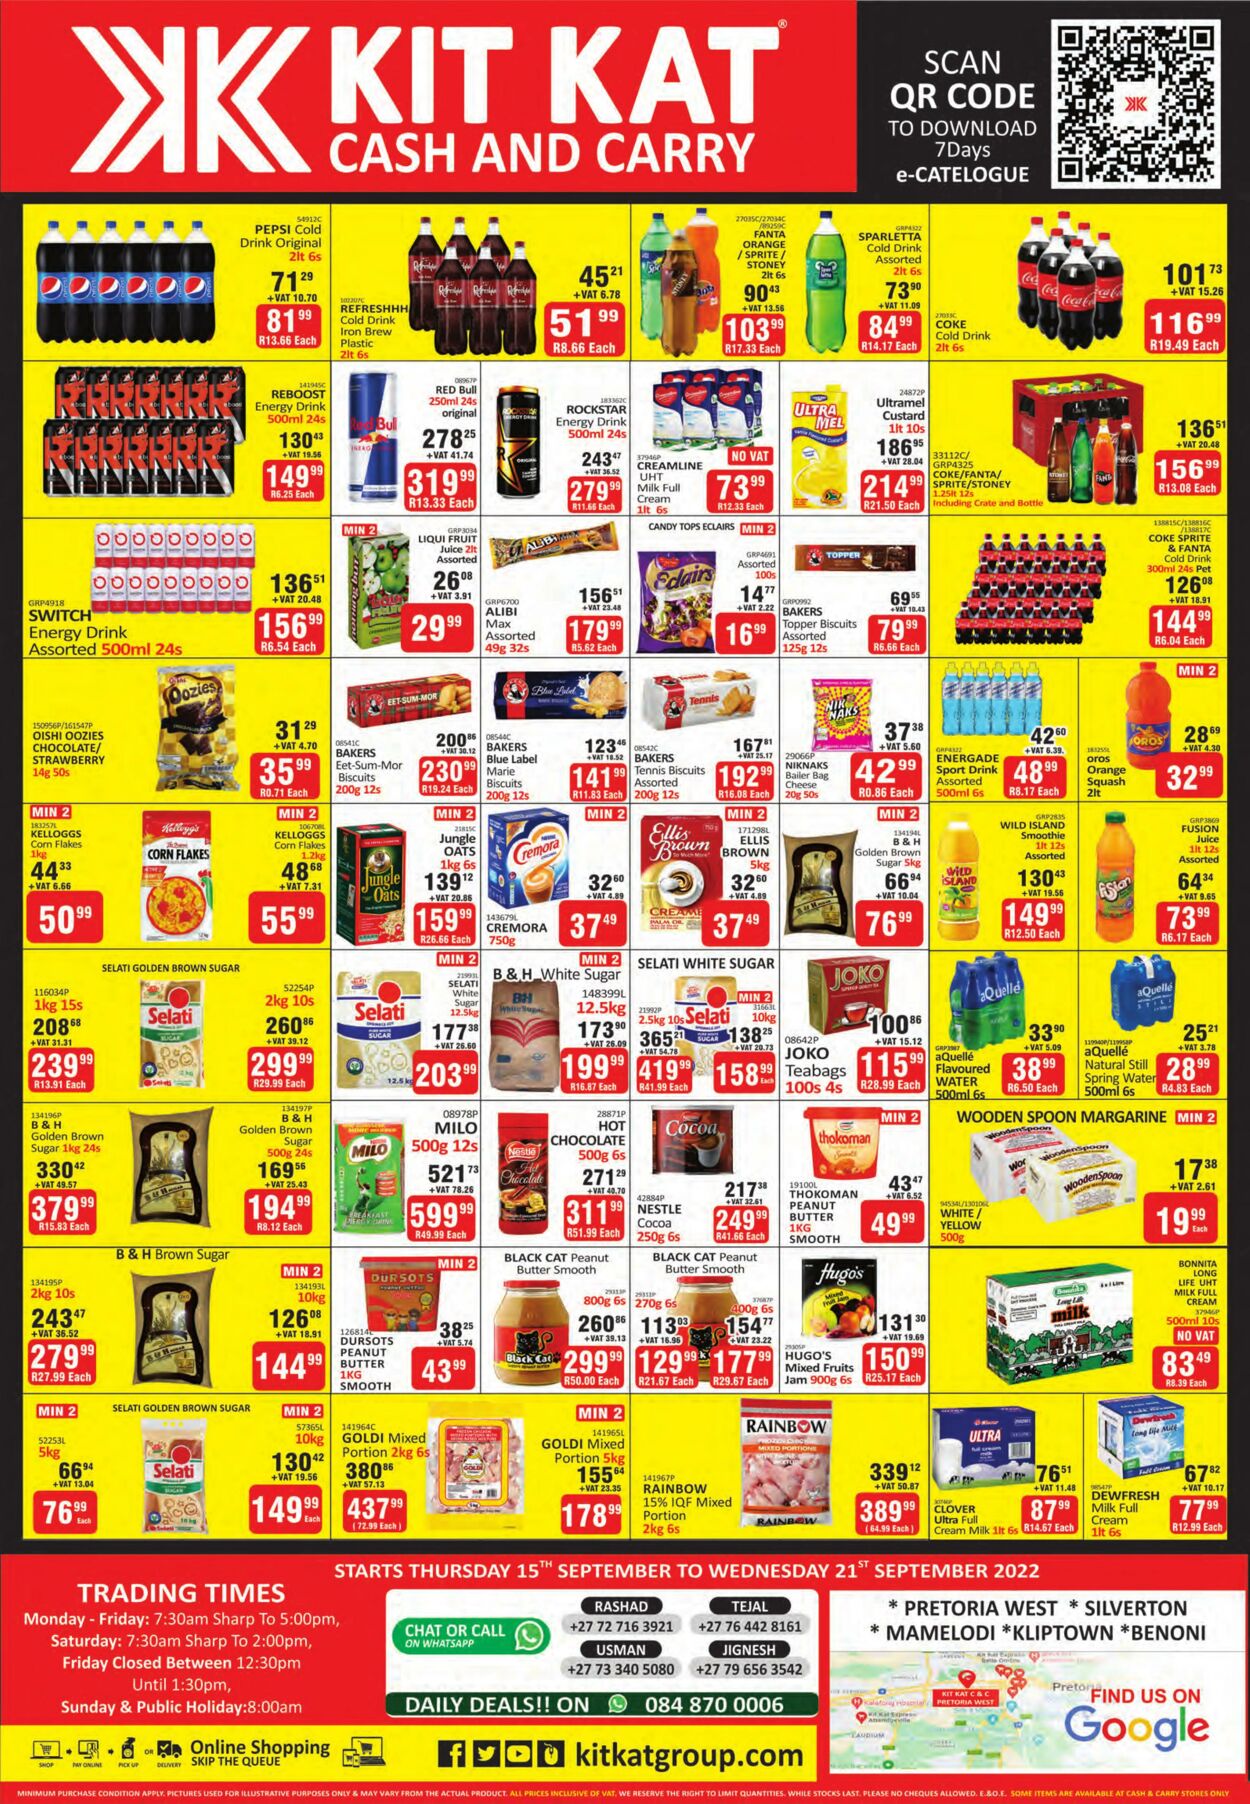 Special Kit Kat Cash and Carry 22.09.2022 - 28.09.2022